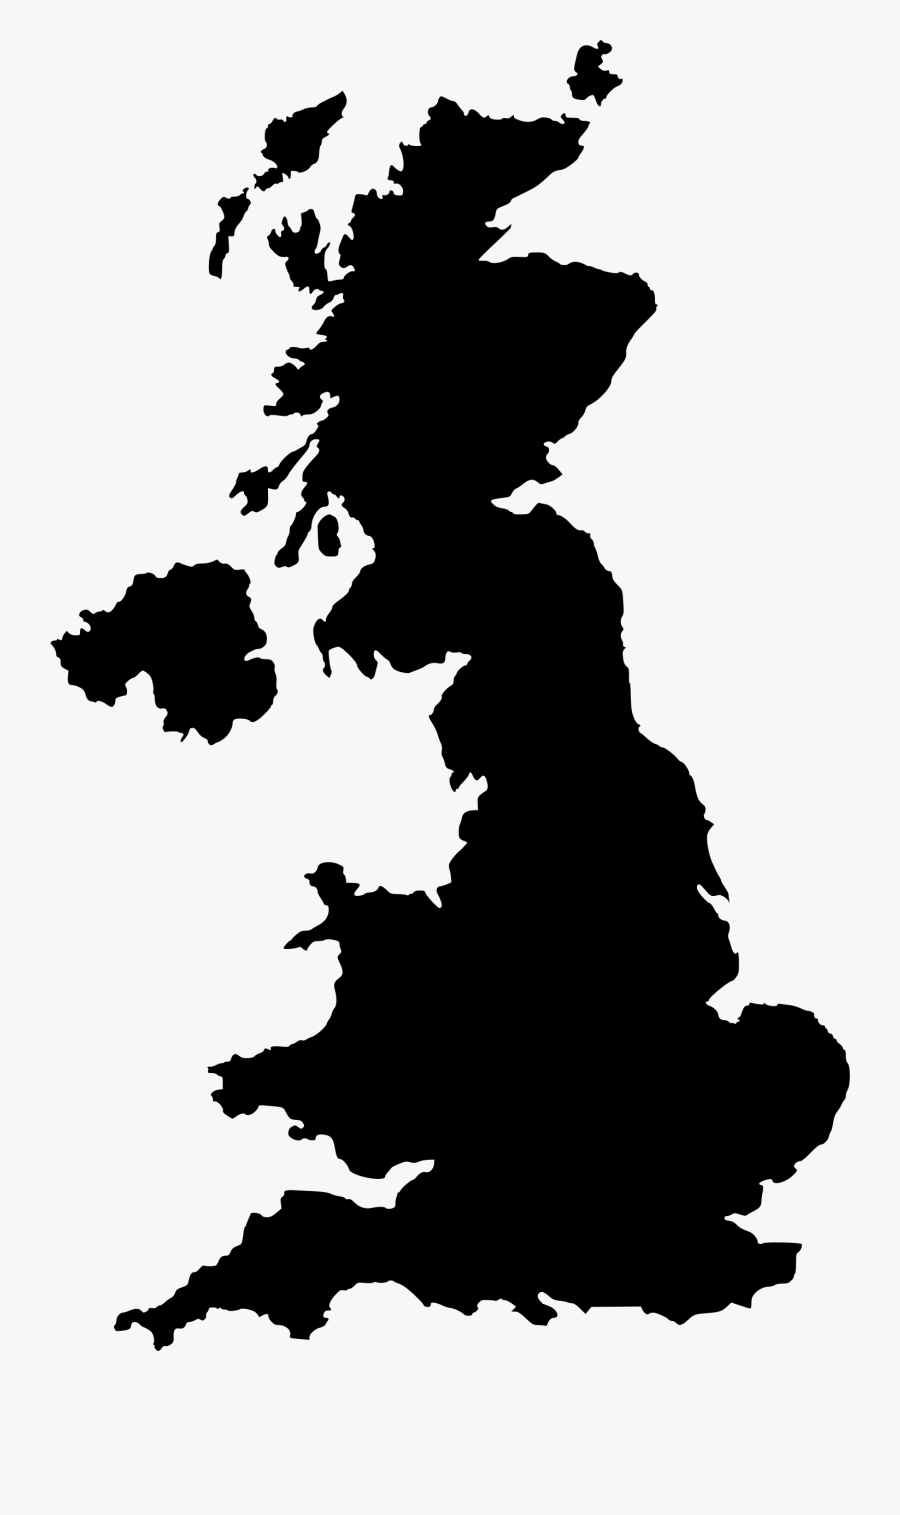 Uk Silhouette Icons Png - United Kingdom Map Black, Transparent Clipart